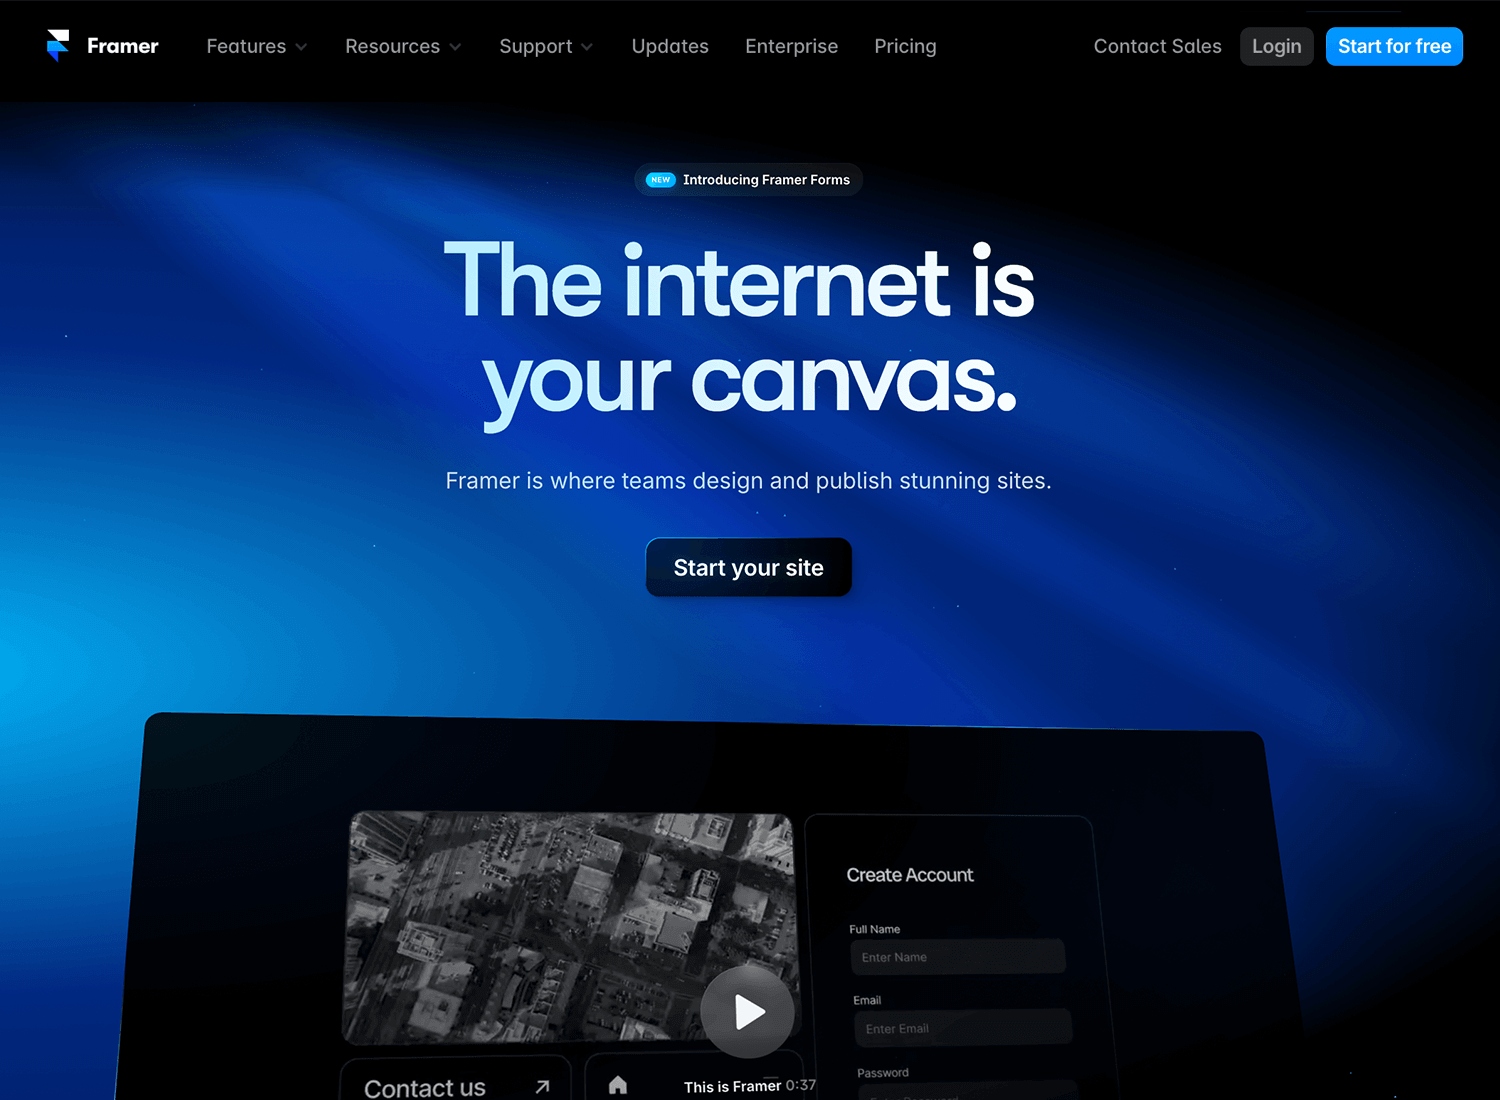 Framer splash screen with bold text 'The internet is your canvas', 'Start your site' button, and a video showcasing website design